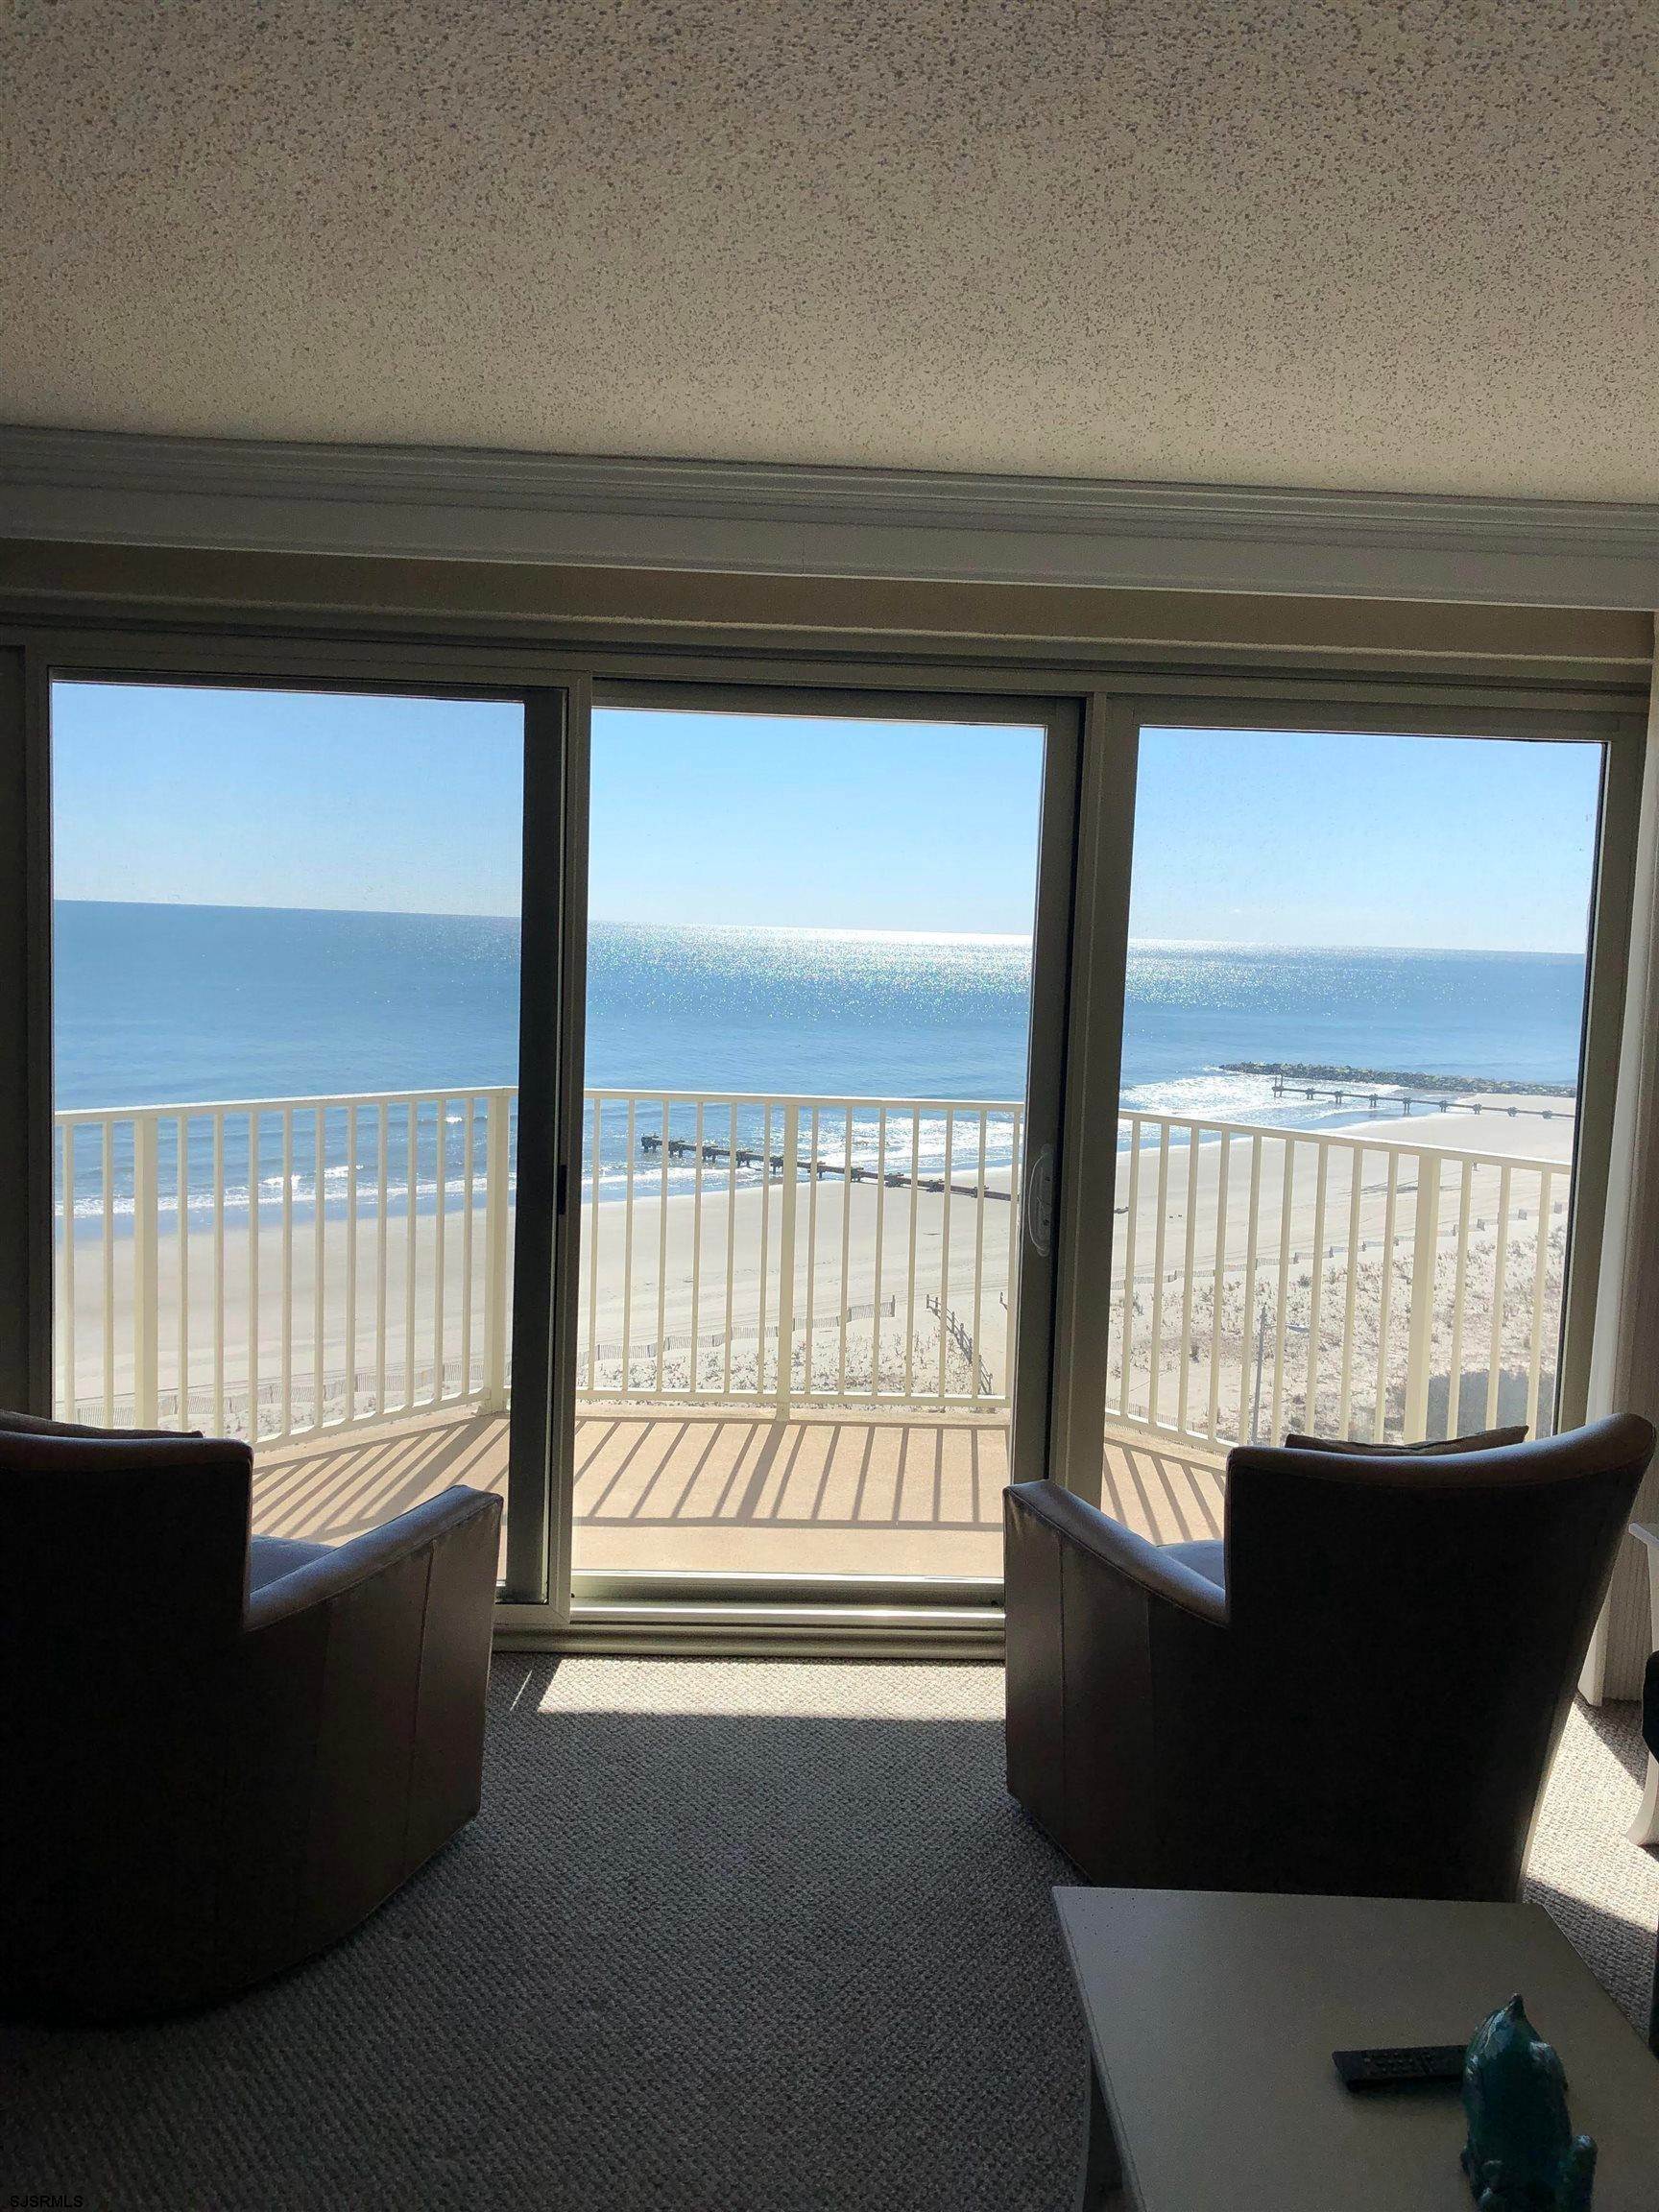 2. Condominiums for Sale at 322 Boardwalk Apt 911 Ocean City, New Jersey 08226 United States